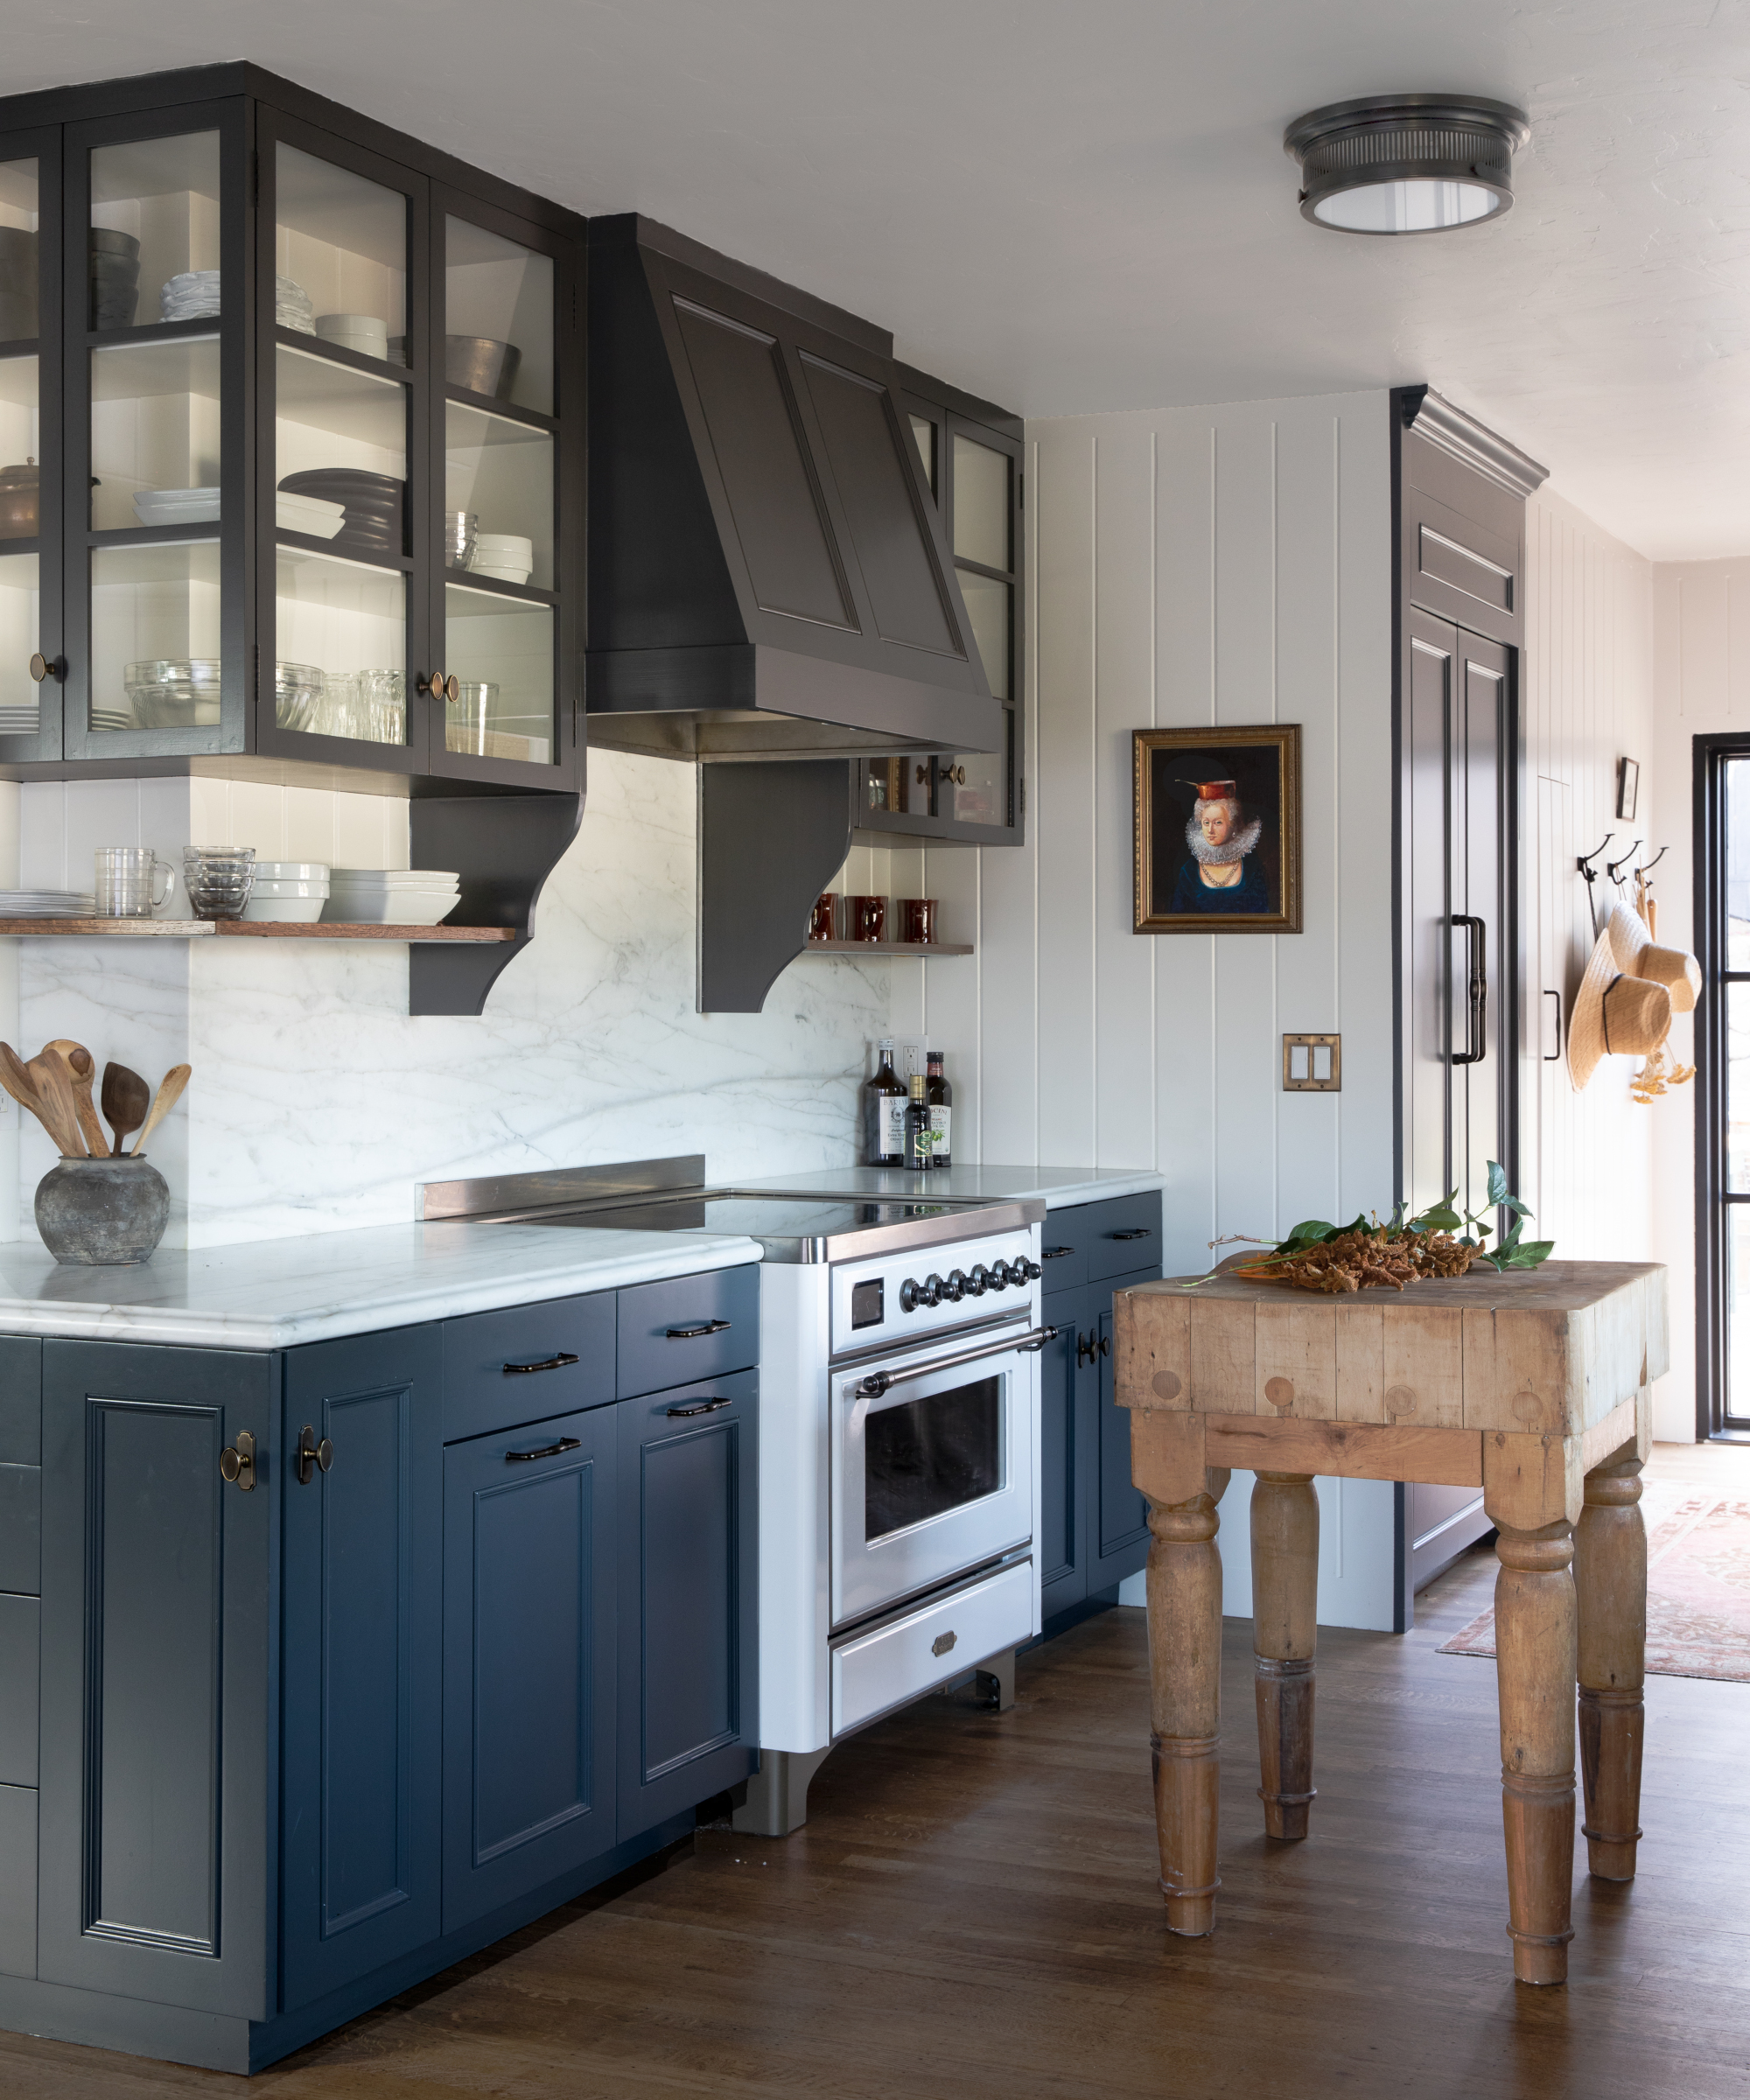 what colors work best in a kitchen with white appliances? interior designers suggest the most timeless schemes